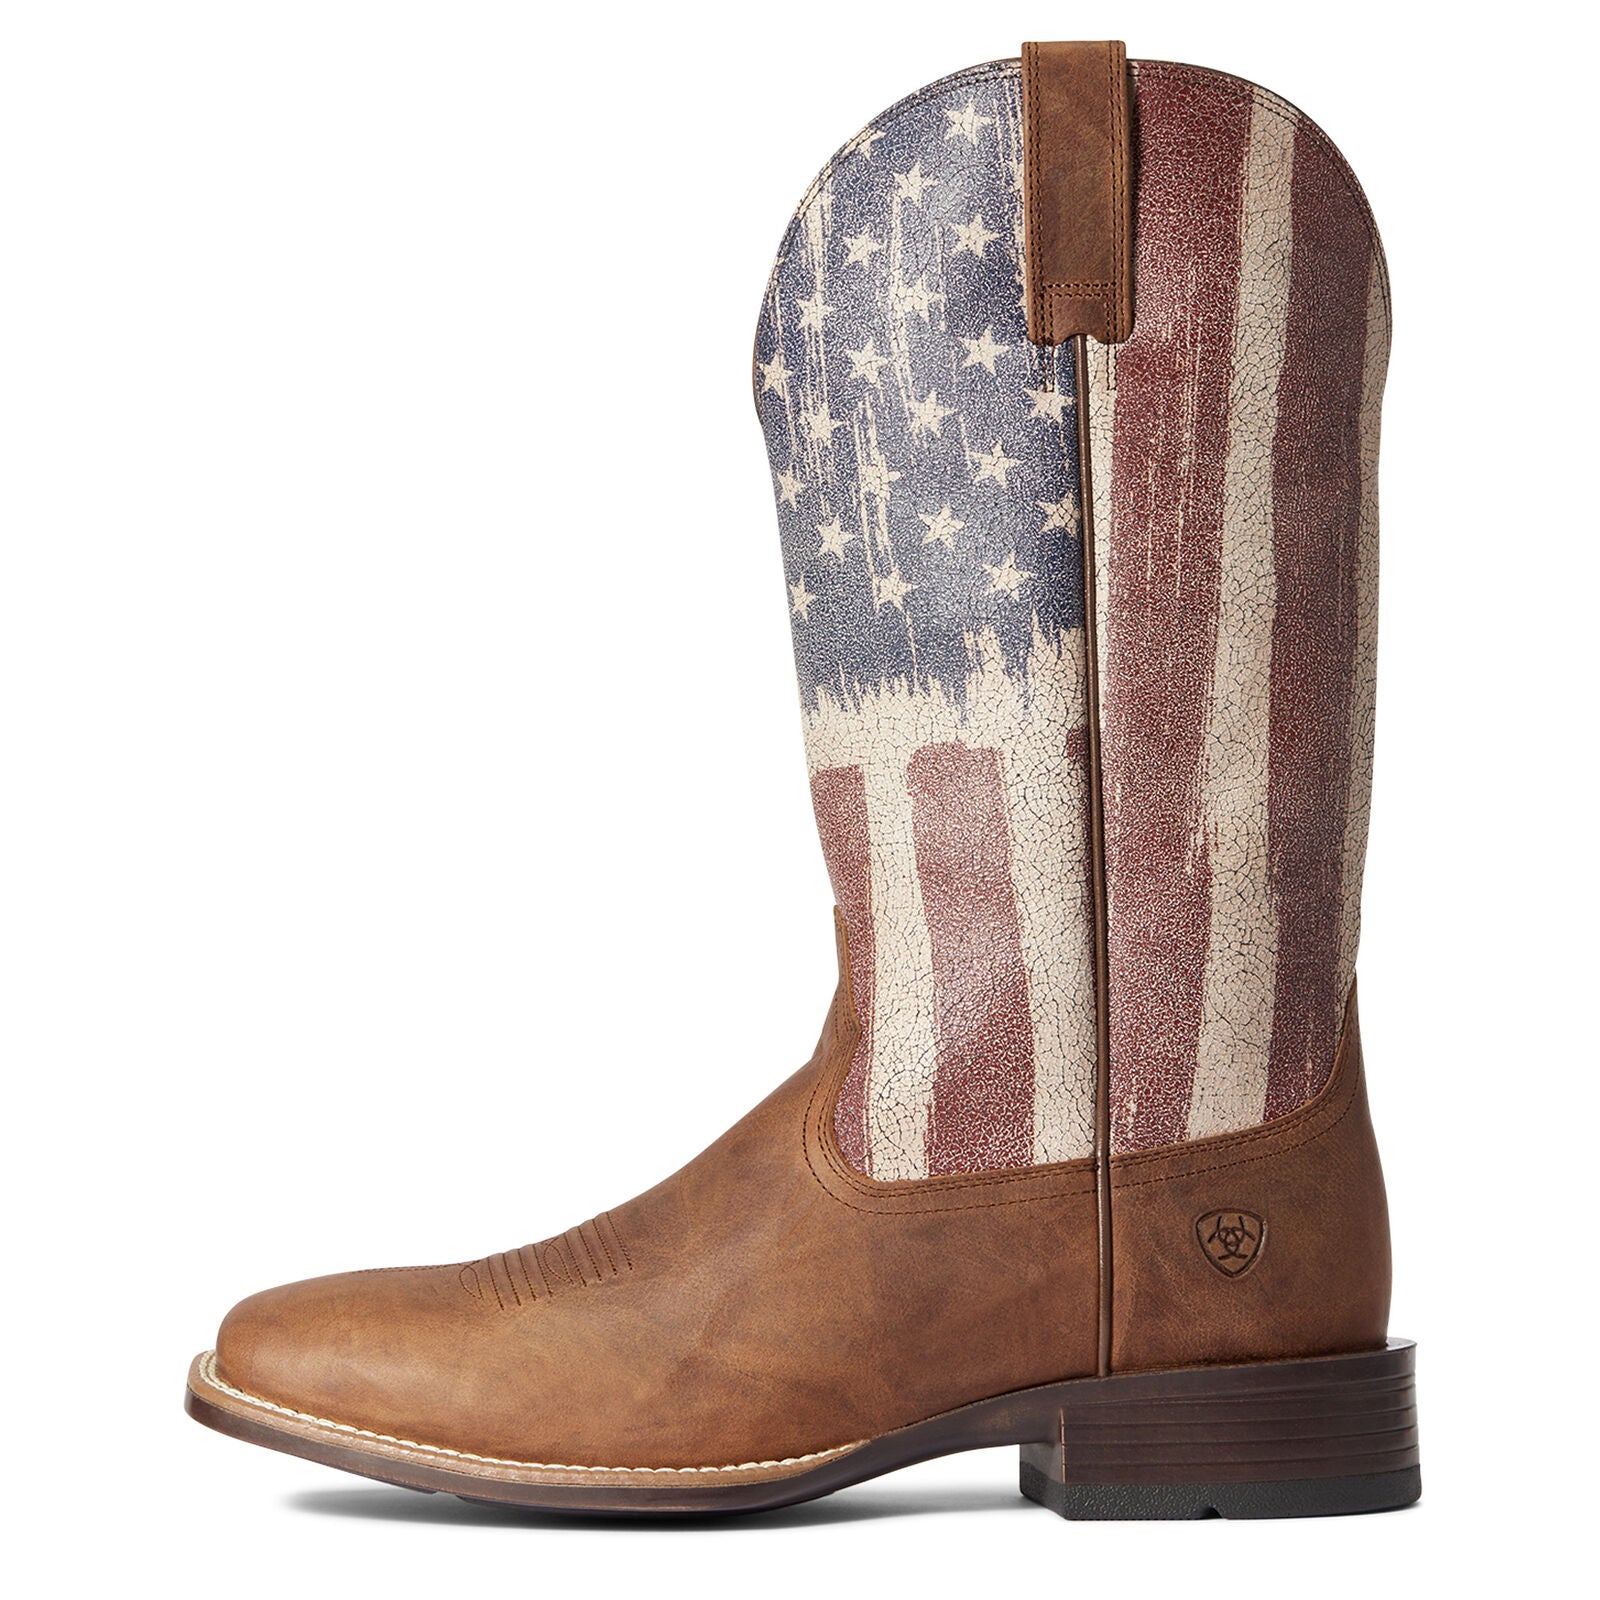 Men's Leather Cowboy Boots the Sport Patriot II by Ariat 10031444